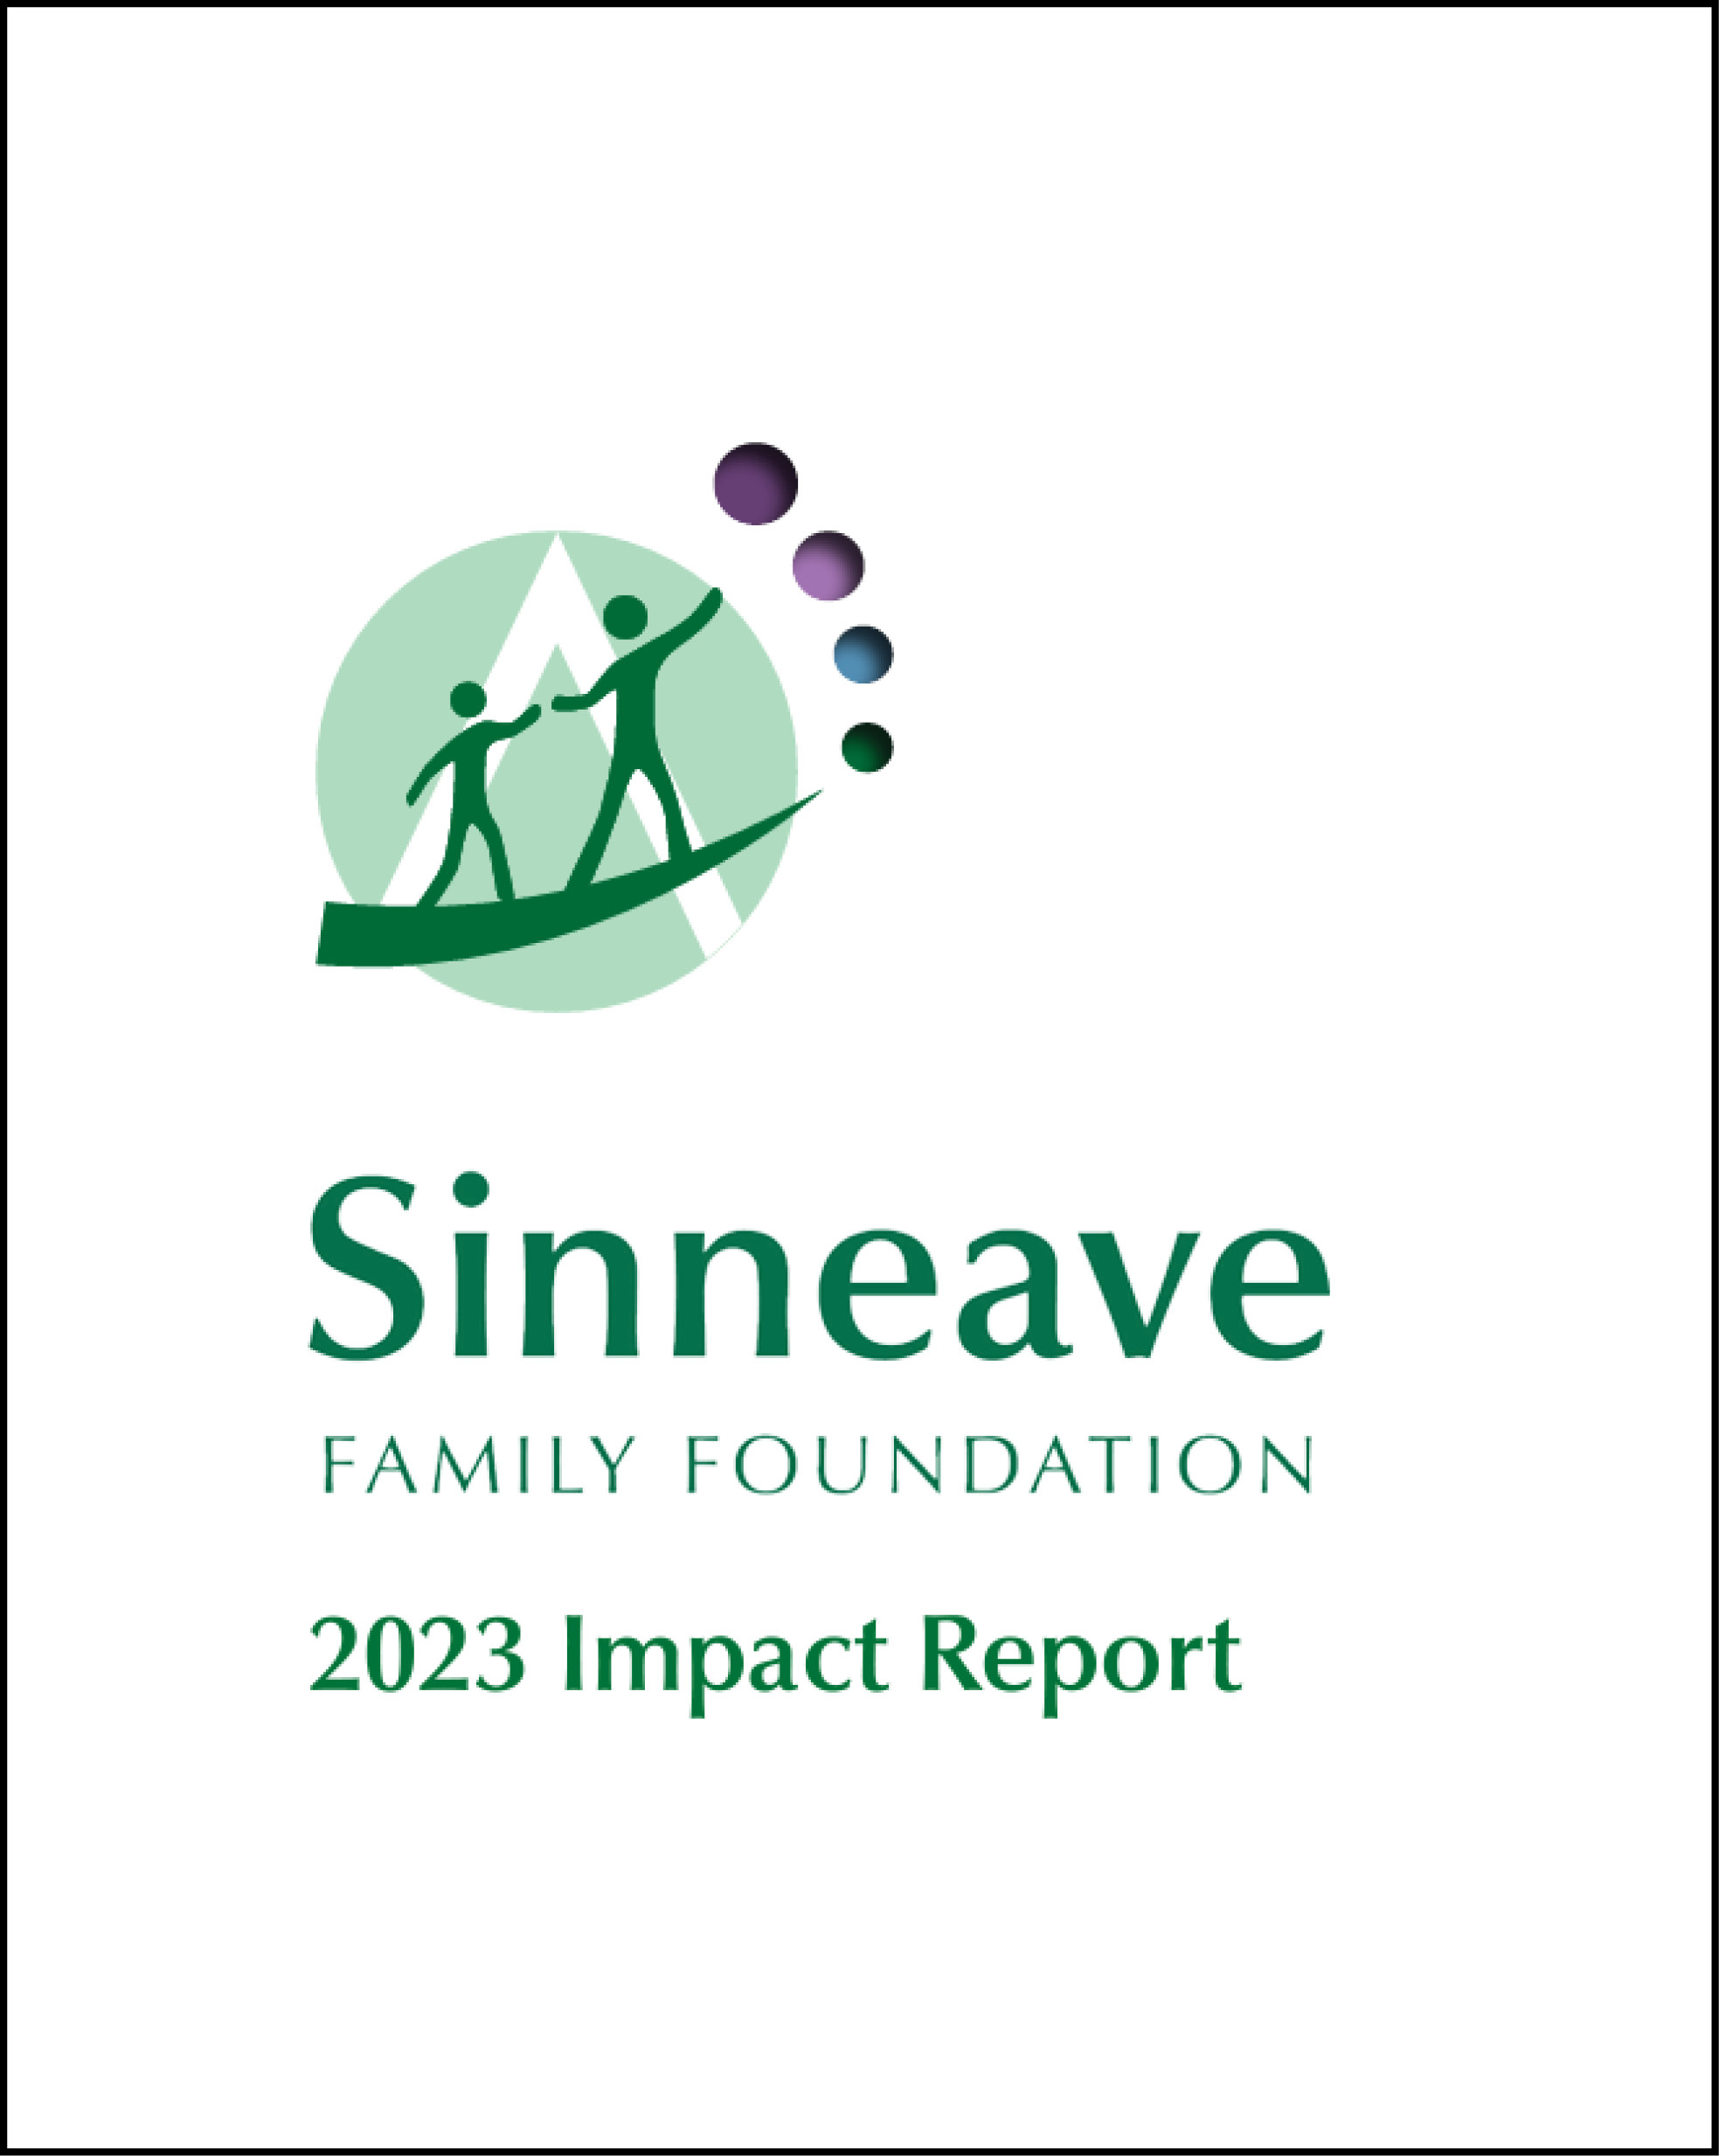 On a white background, is the logo of The Sinneave Family Foundation in green and white. Below it, the text reads, "Sinneave Family Foundation 2023 Impact Report" also in green. This is the cover image of the 2023 Impact Report.